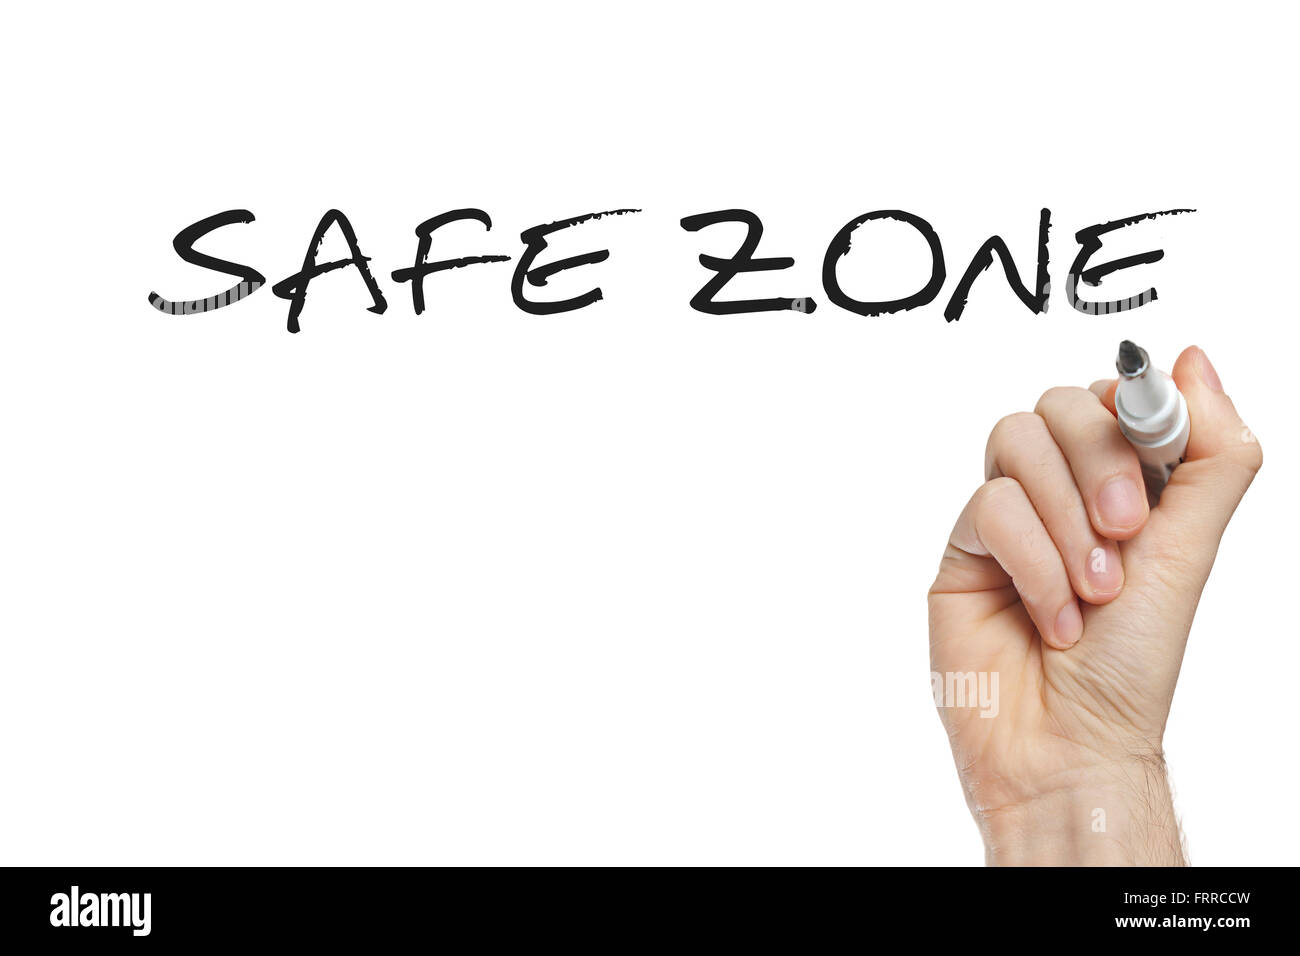 Hand writing safe zone on a white board Stock Photo